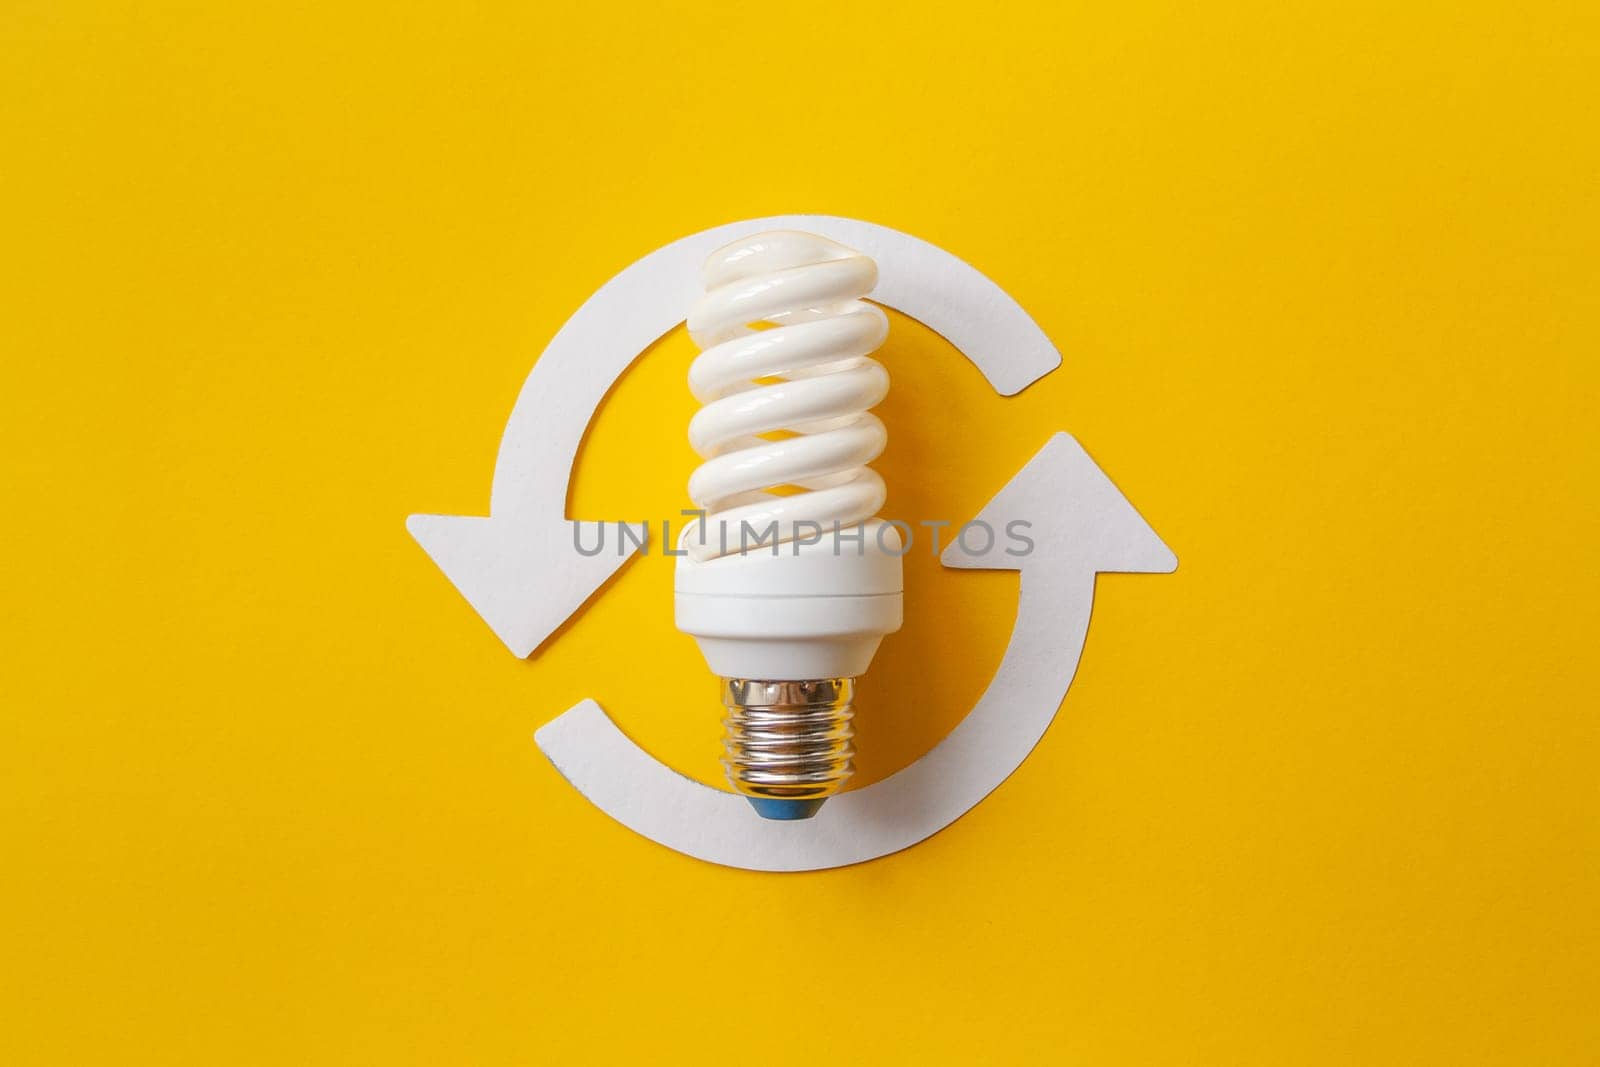 Energy saving light bulb on a orange background by Quils